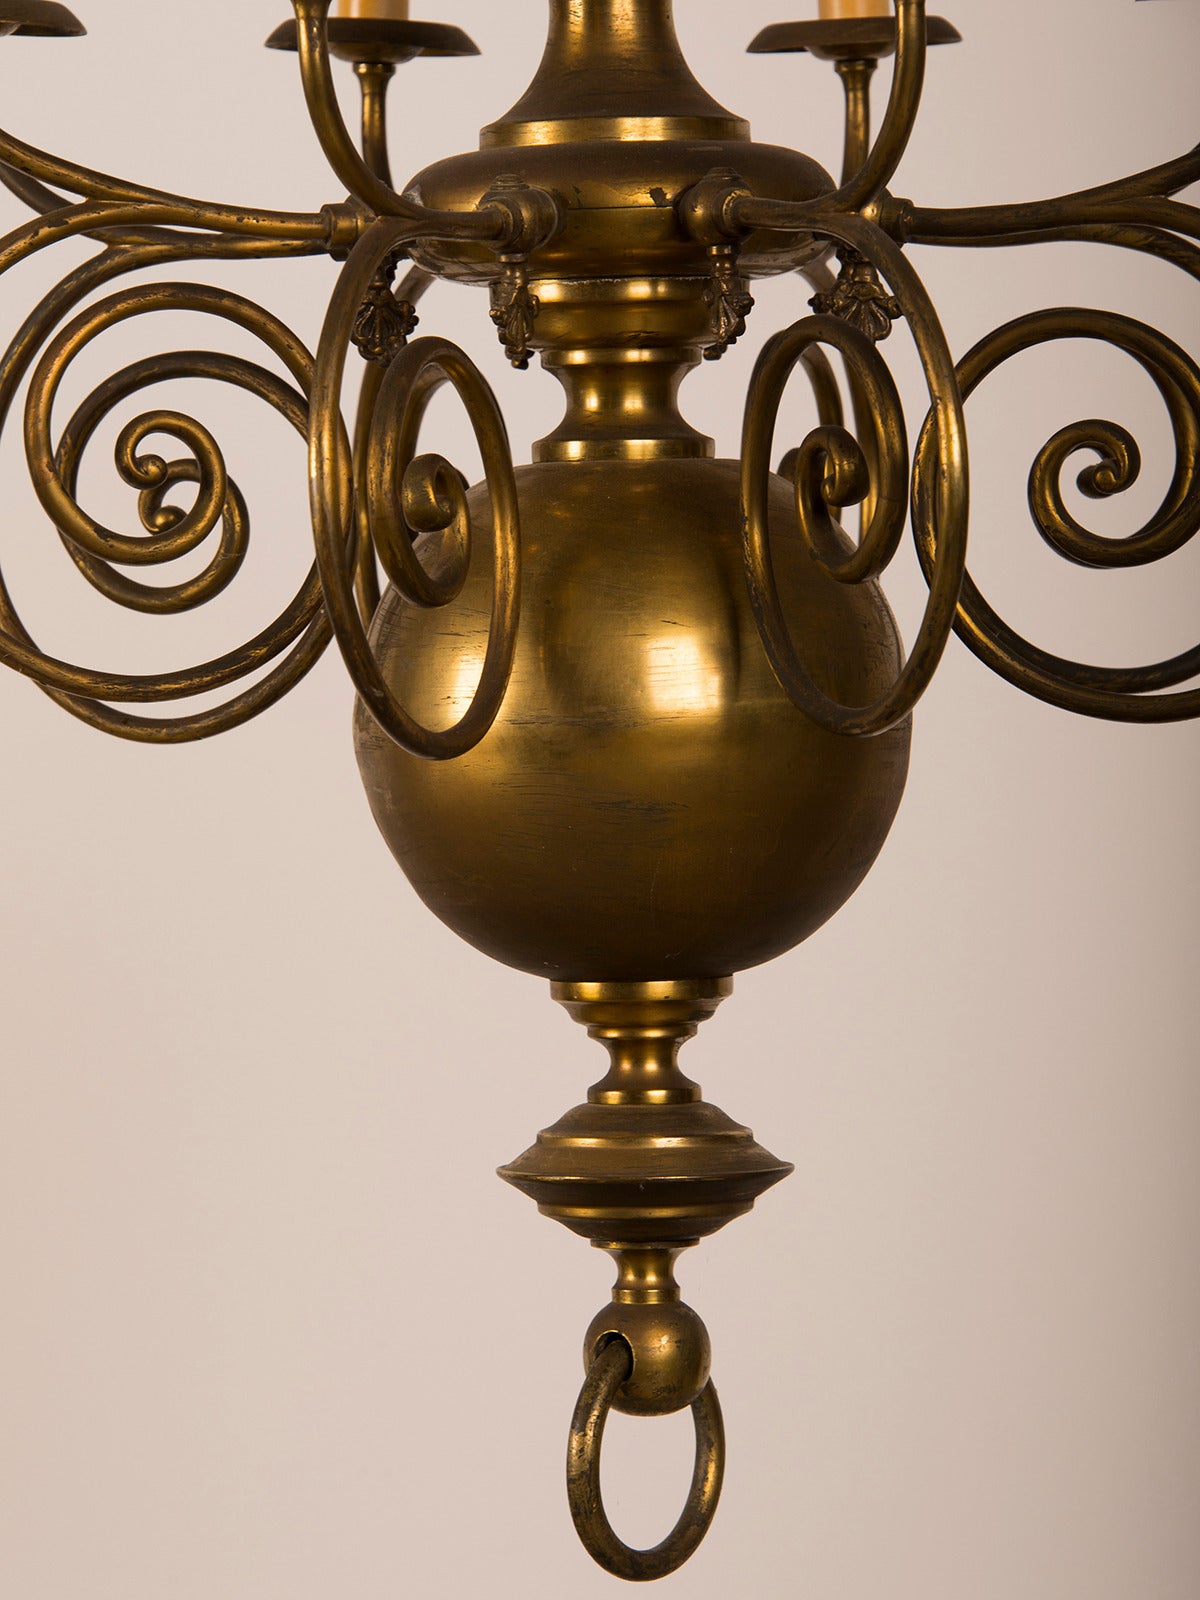 Early 20th Century Tall, Narrow Antique Dutch Brass Chandelier with Eight Arms, circa 1900